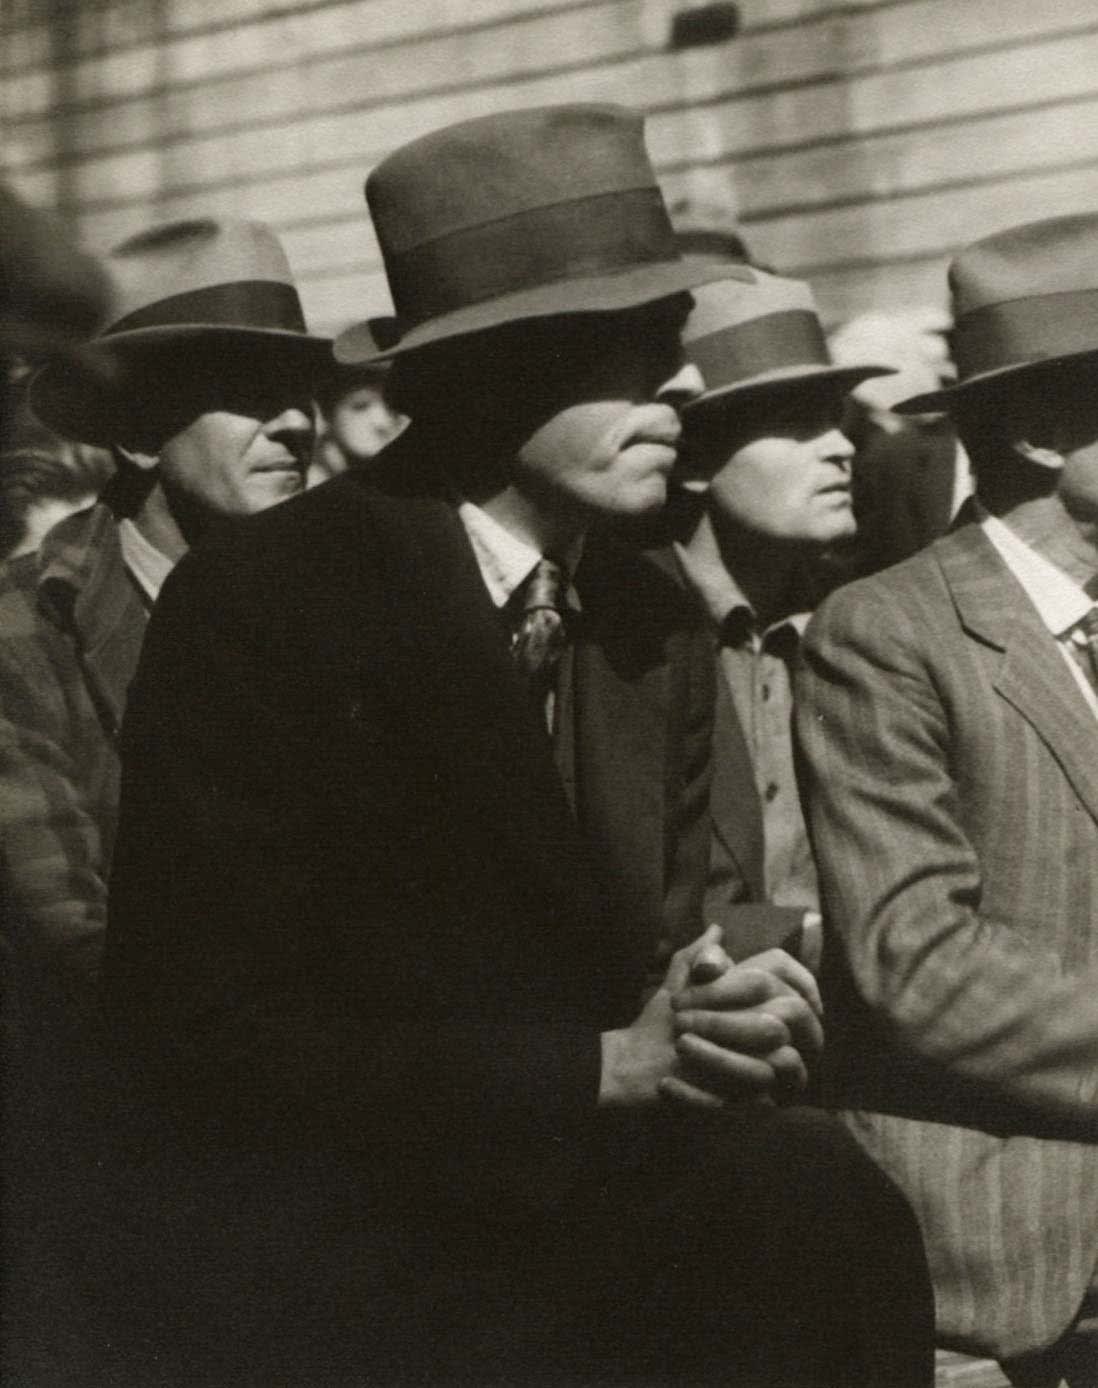 Dorothea Lange Waterfront Protest The Audience Listens men in suits and hats in audience